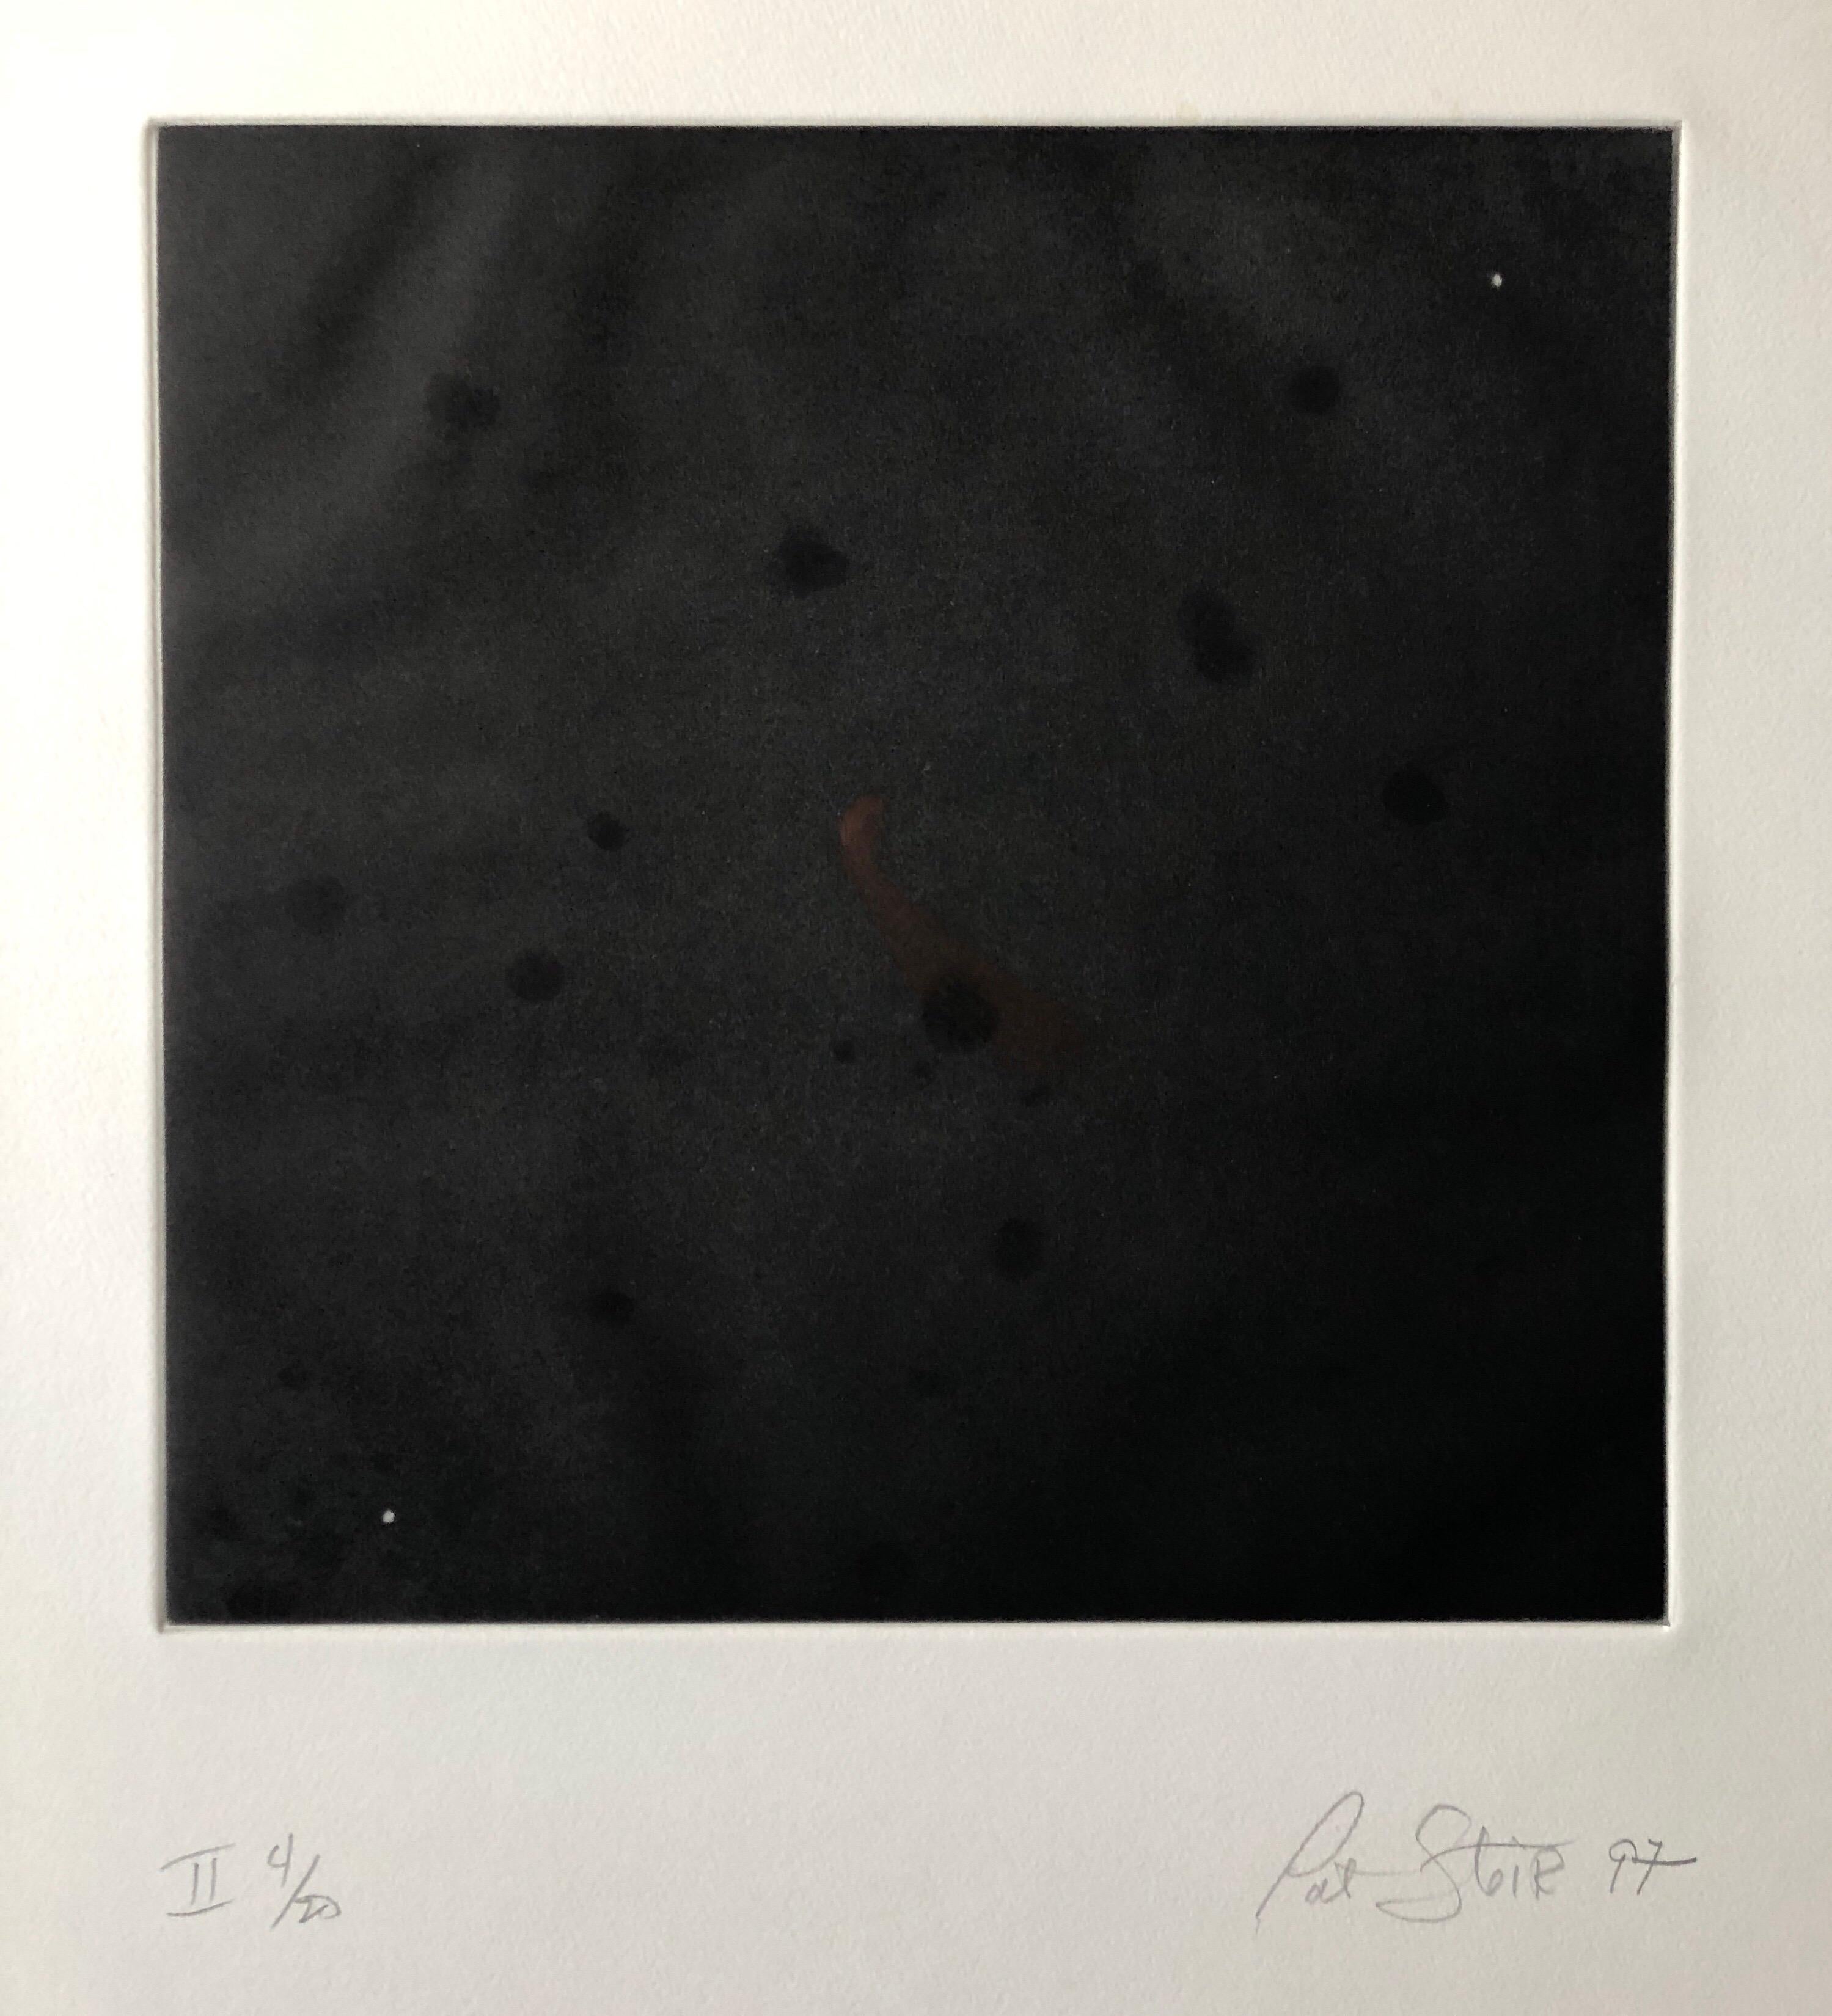 Comet, Outer Space Dark Series Aquatint Etching Color Abstract Expressionist  - Black Print by Pat Steir